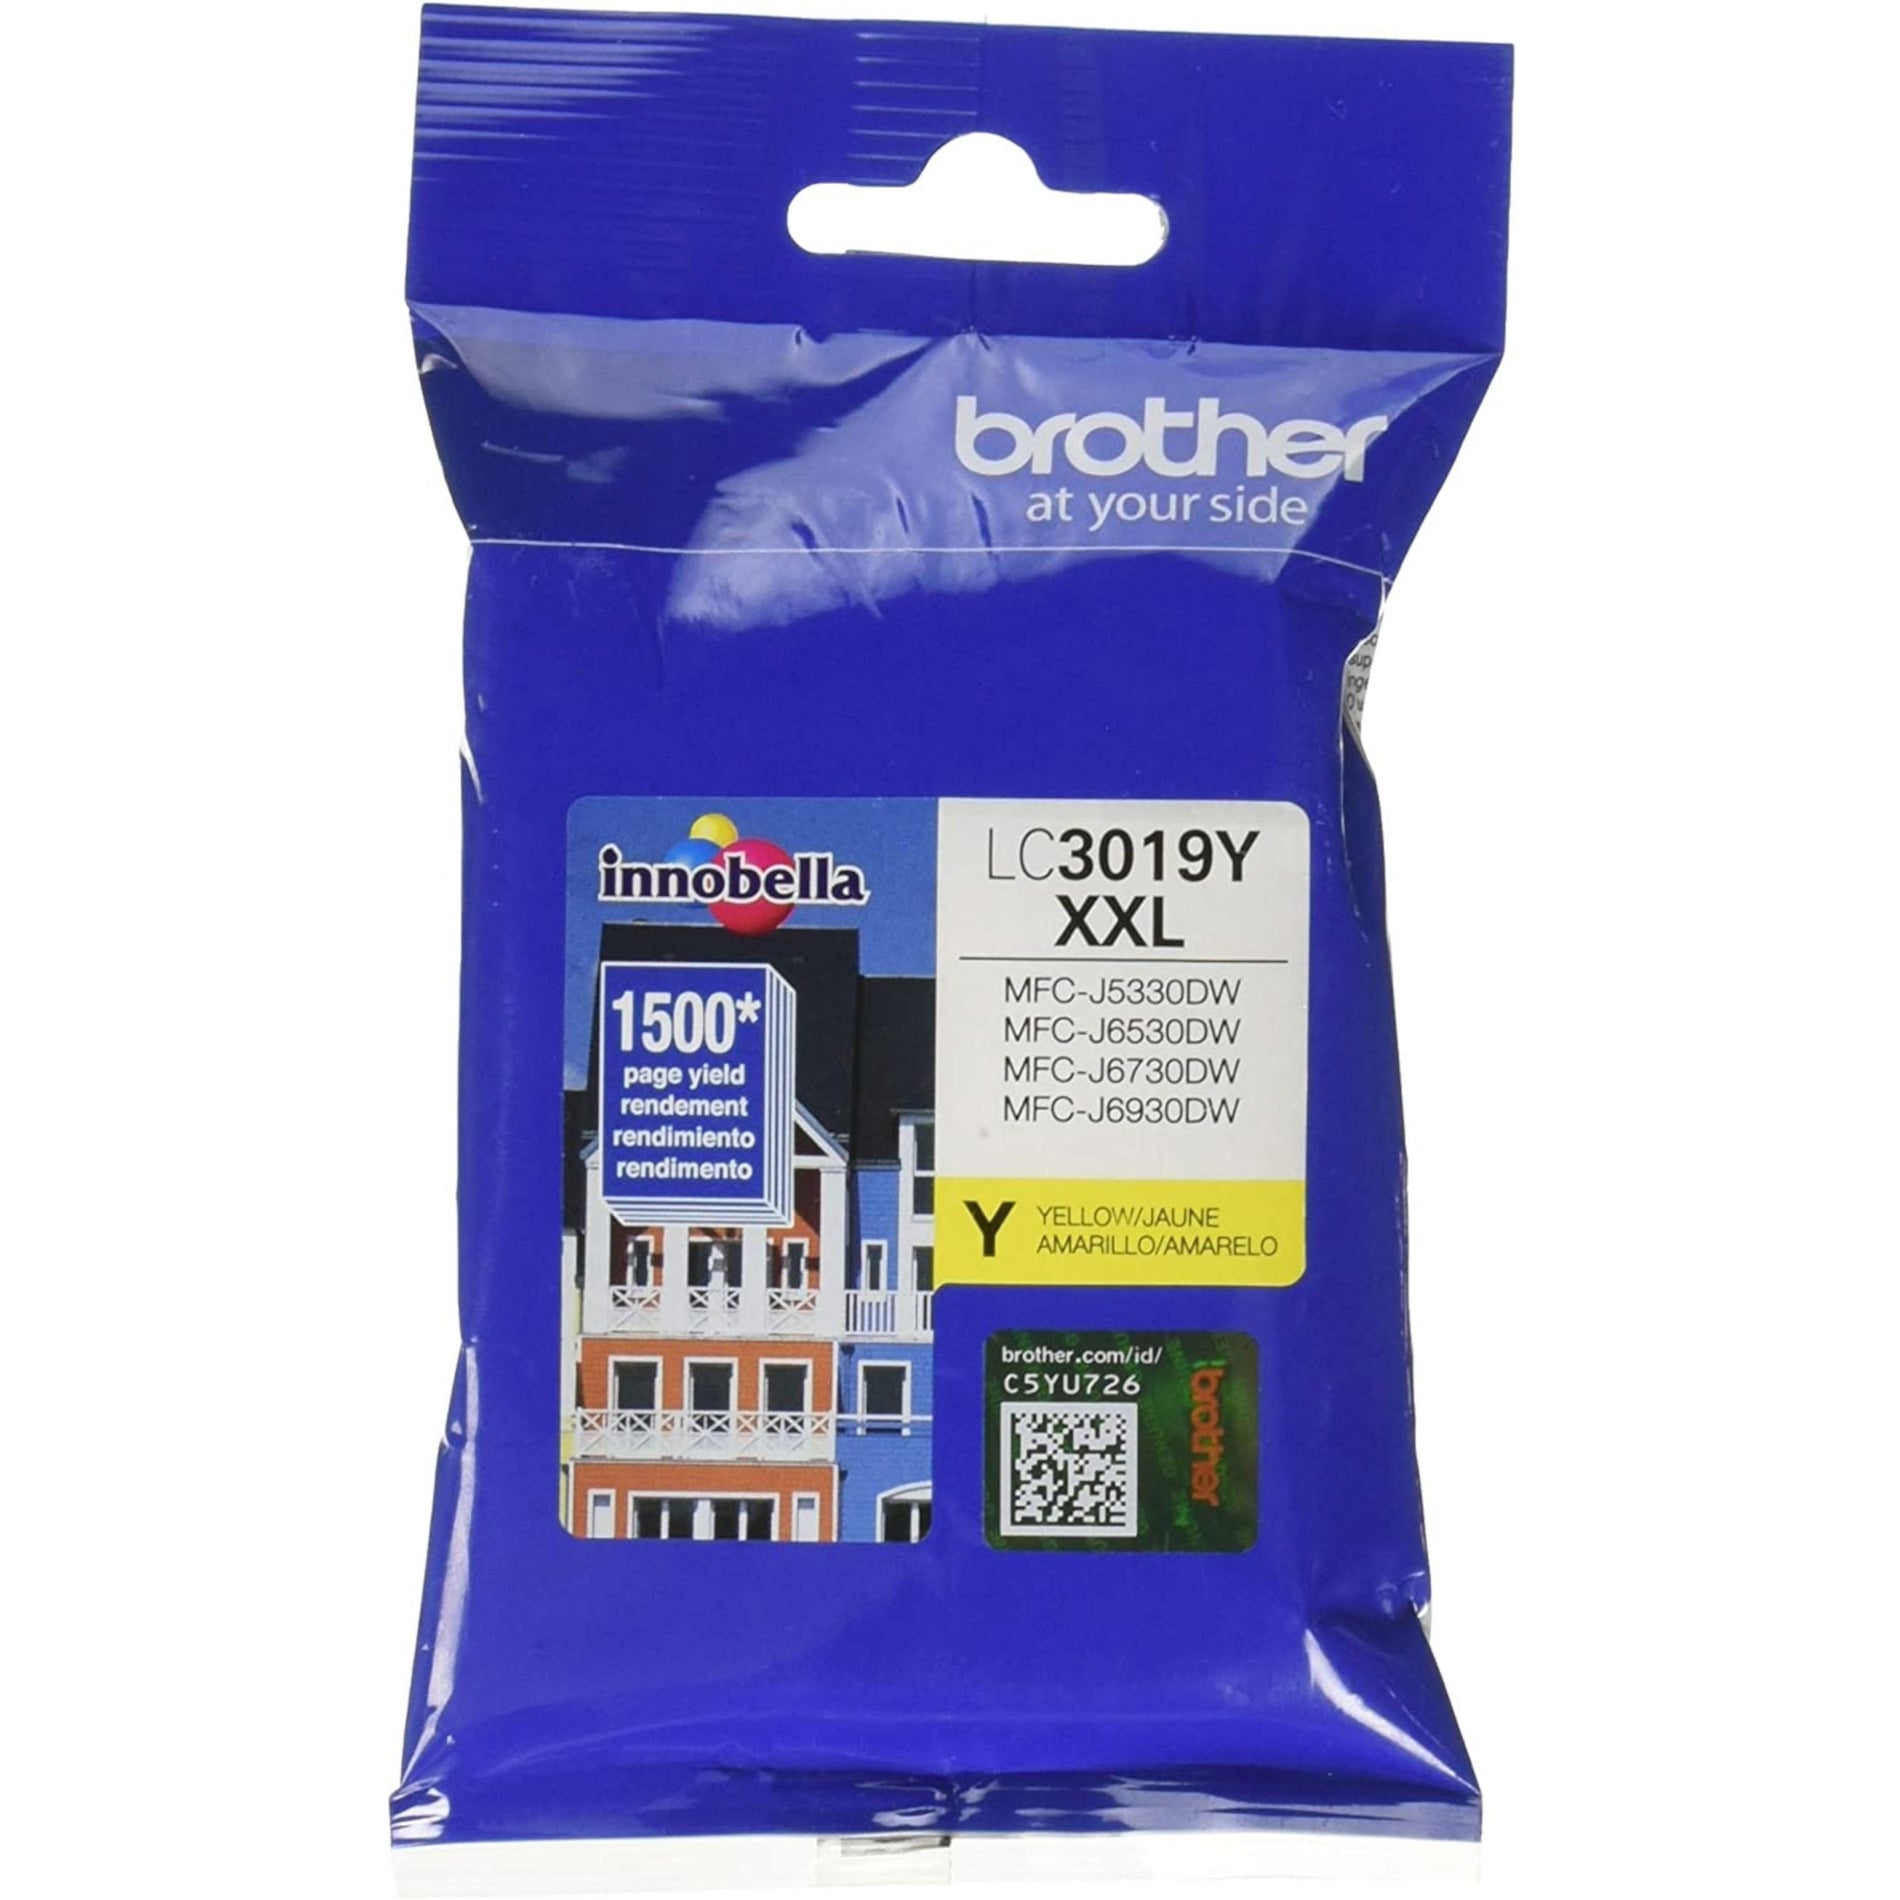 Brother LC3019Y Innobella Super High Yield Ink Cartridge, Yellow - 1500 Pages